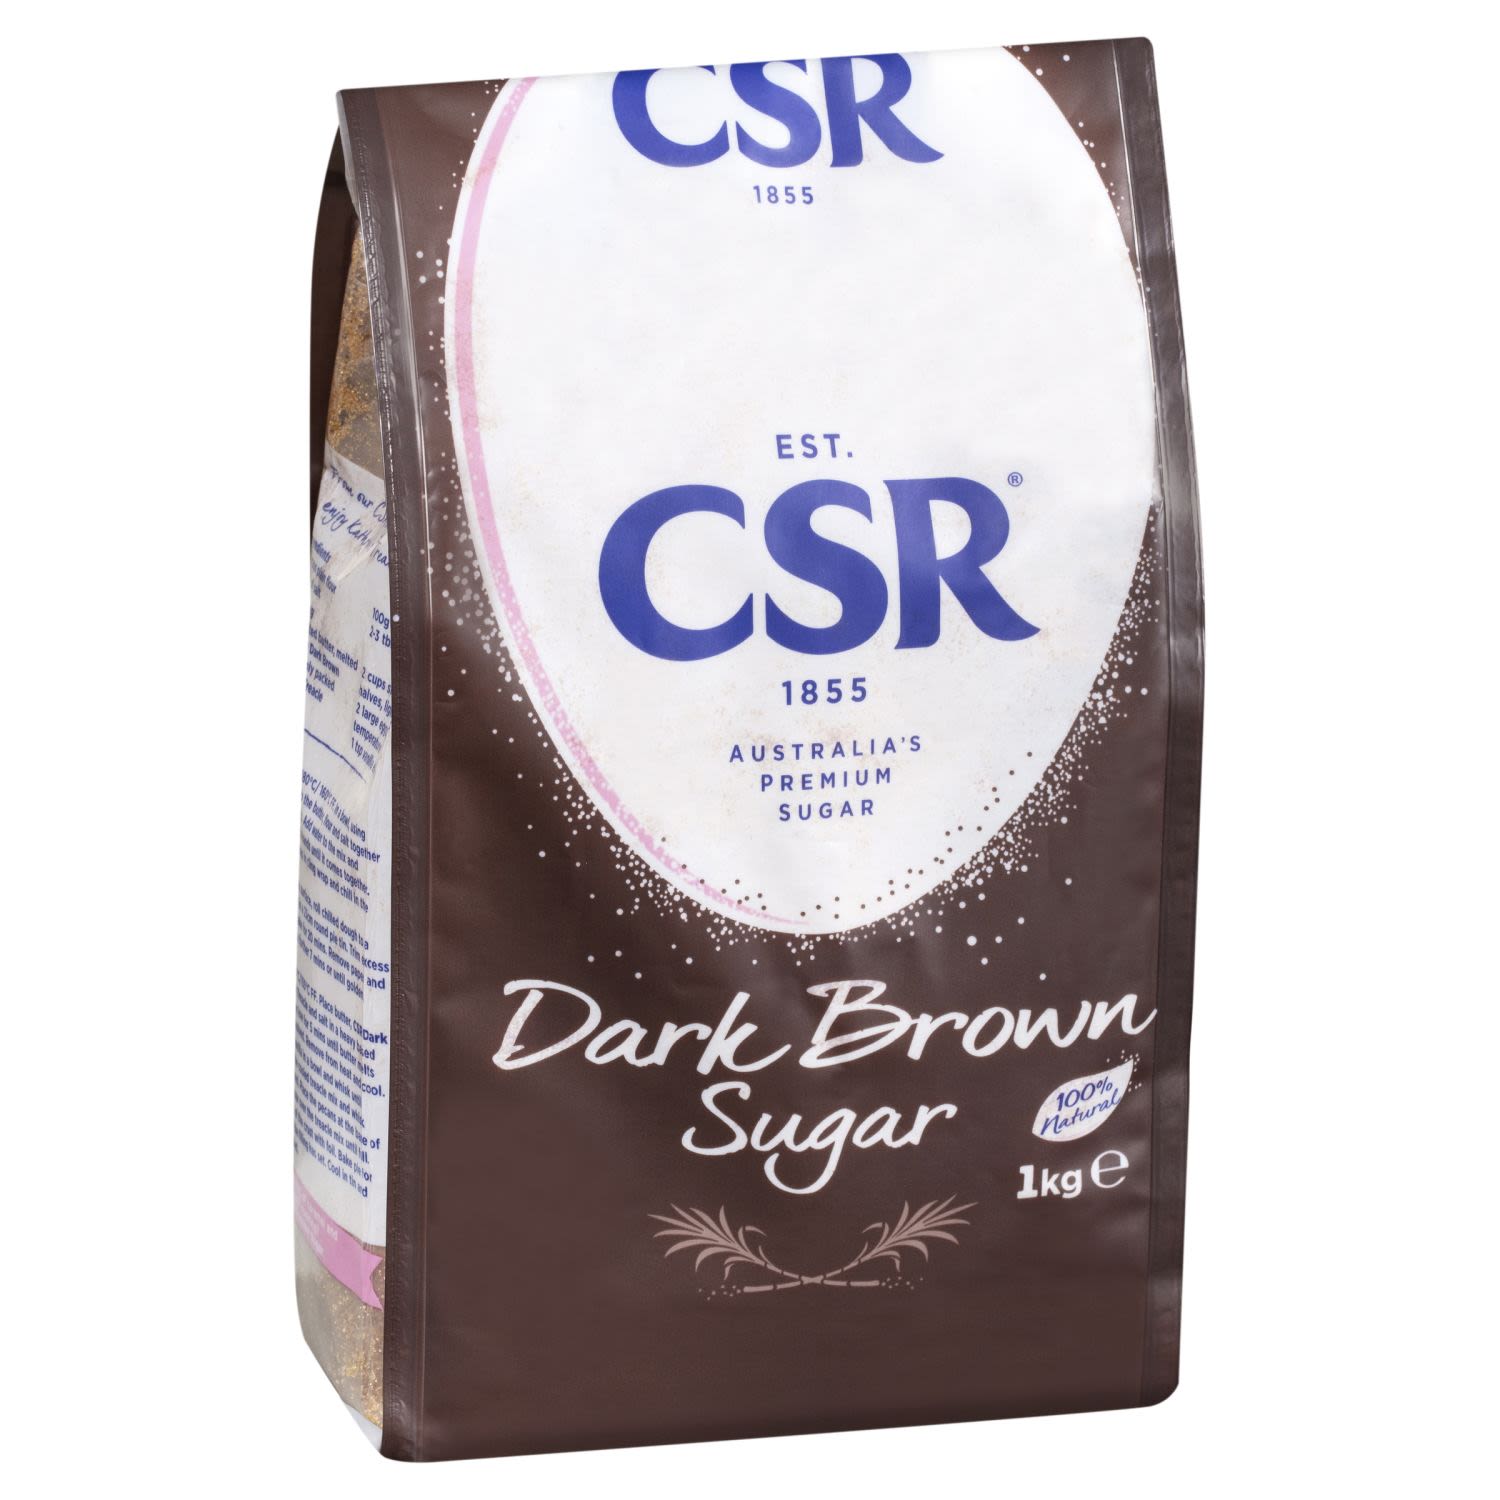 Loved by Australians for generations, CSR Dark Brown Sugar is 100% natural with a dark colour and rich, distinctive flavour. Crafted with molasses, this sugar is ideal for sweetening fruits, puddings and cakes. it's also suited for savoury dishes including barbecue sauces and marinades. Crafted from 100% Australian cane sugar, CSR Dark Brown Sugar is designed to be versatile for your everyday cooking needs.<br /> <br /> <br /><br />Country of Origin: Product of Australia